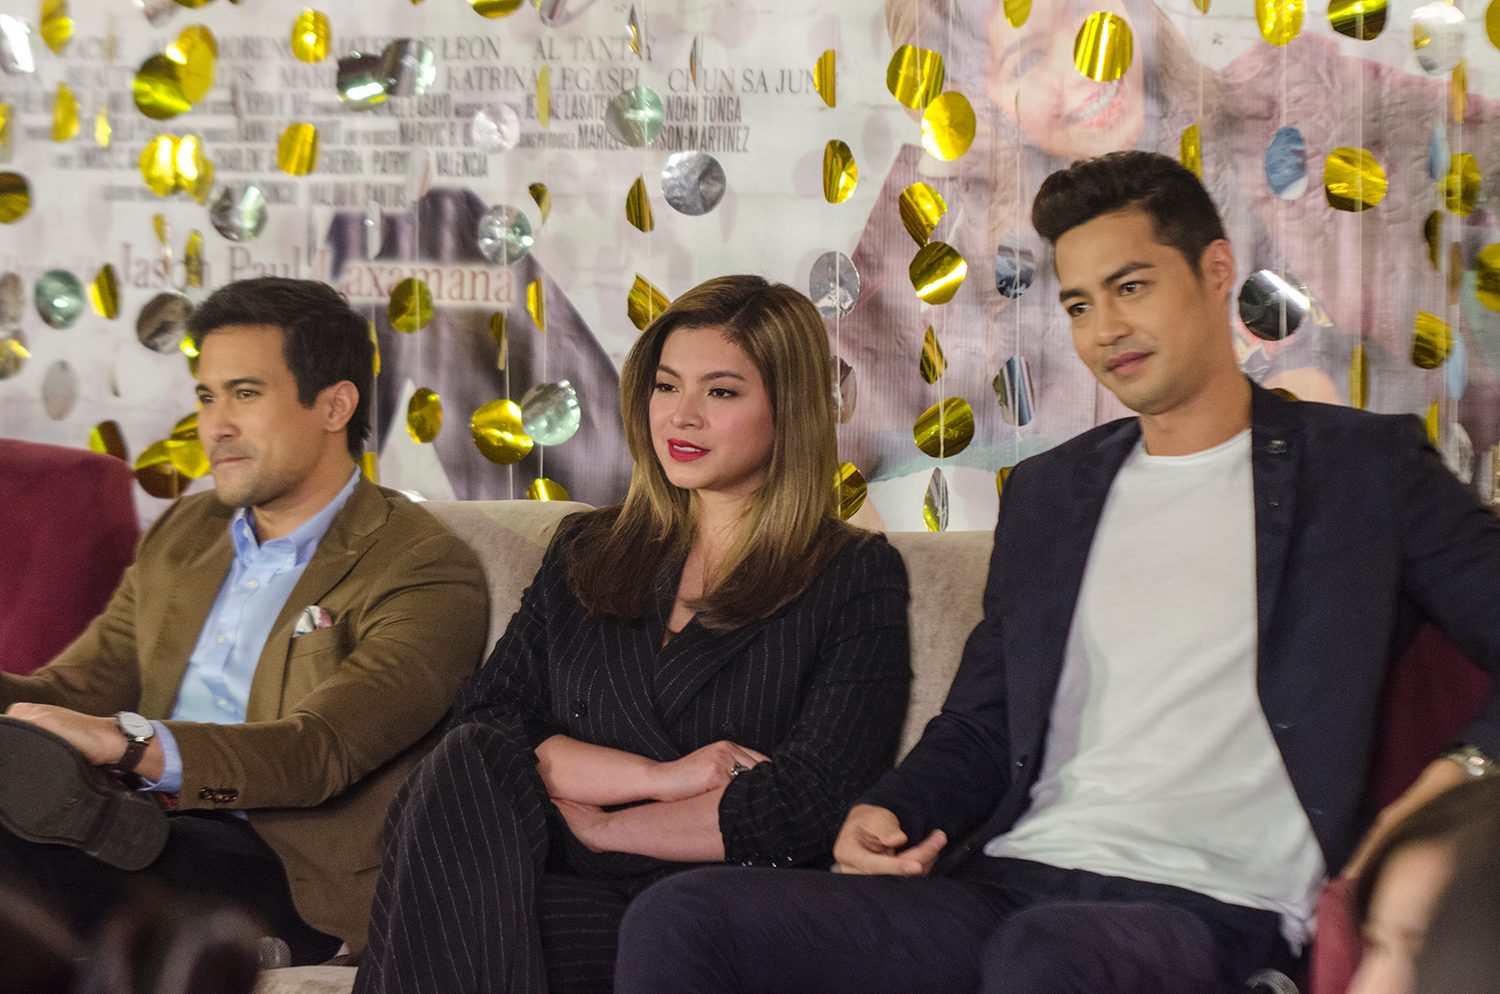 6 fun facts about Angel-Sam-Zanjoe movie ‘The Third Party’